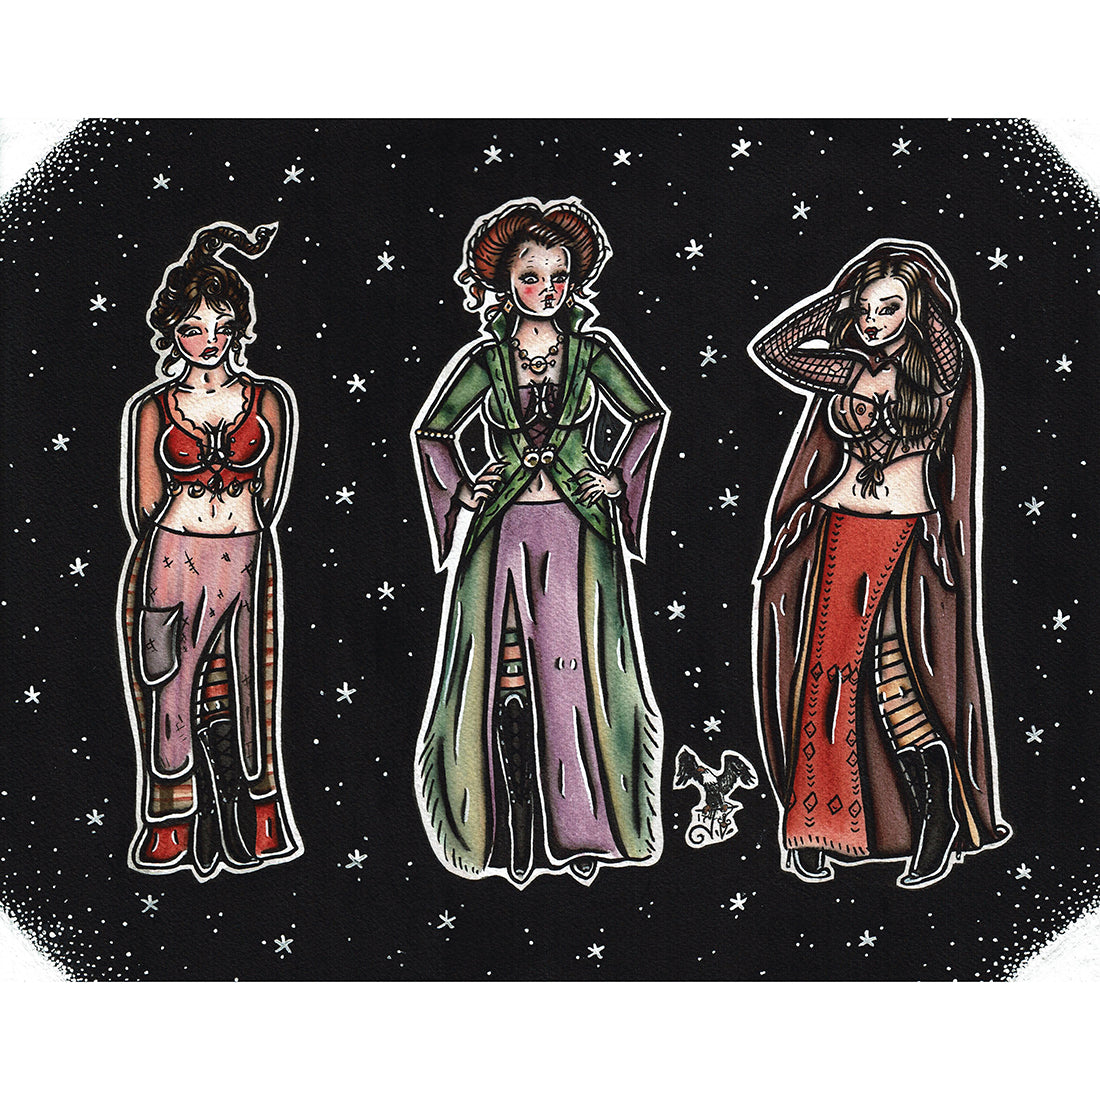 American Traditional Tattoo Flash Hocus Pocus Sanderson Sisters pinup watercolor painting.